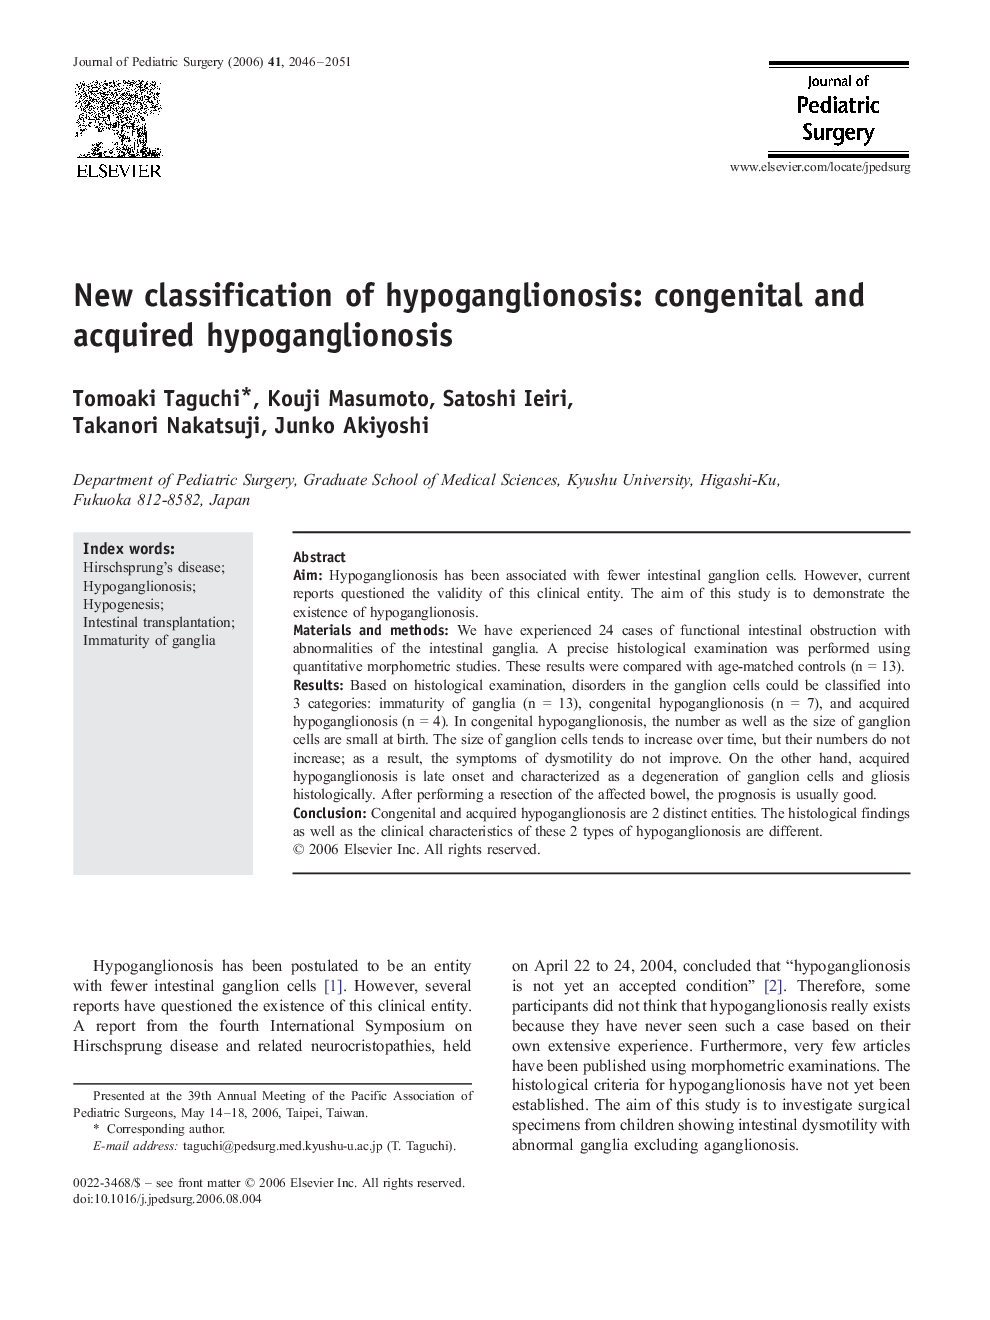 New classification of hypoganglionosis: congenital and acquired hypoganglionosis 